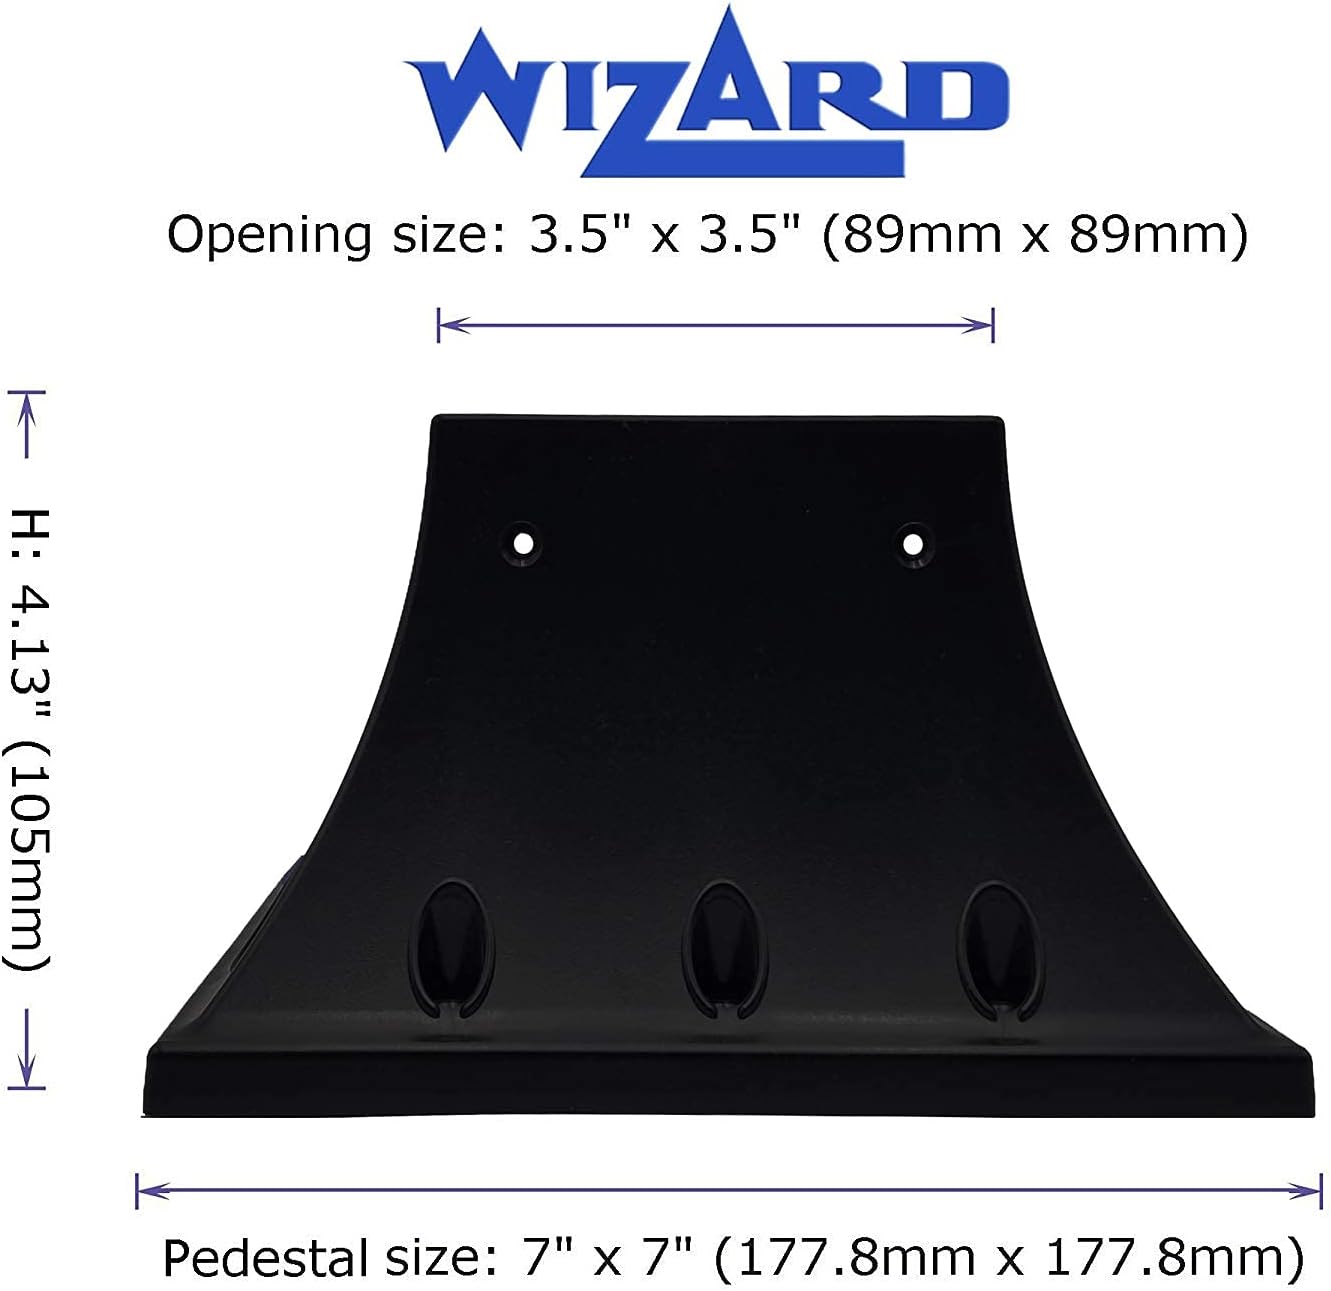 Wizard Industries 4x4 Post Support Pro Version Table Leg Bracket (Actual Size 3.5"x3.5") Post and Screws NOT Included!